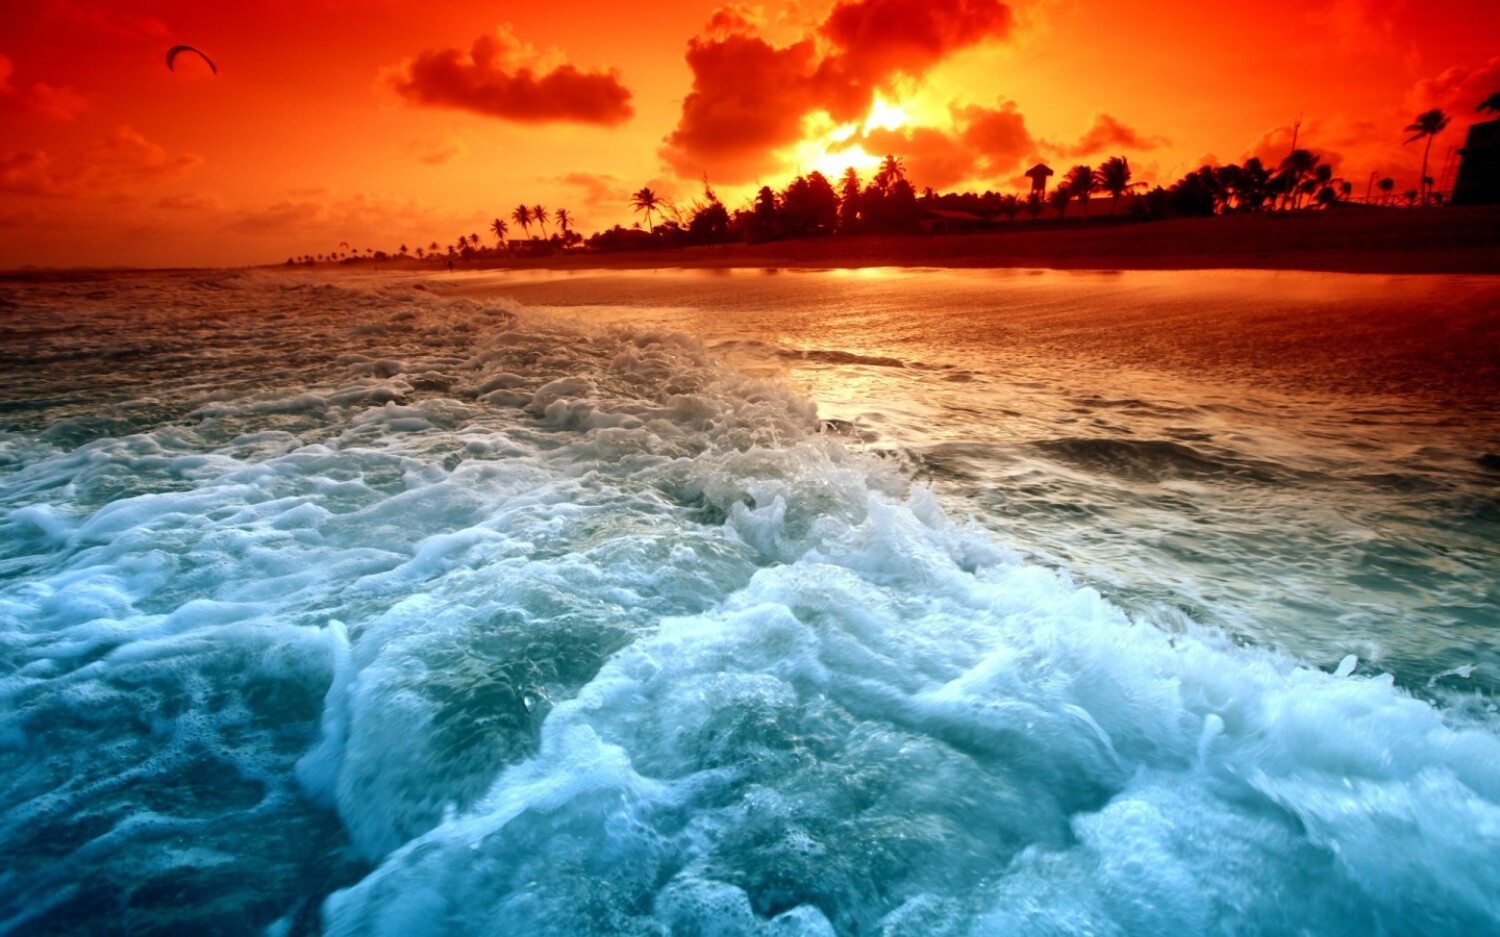 Download this Beautiful Burning Beach Upload Free Download Widescreen Nature picture